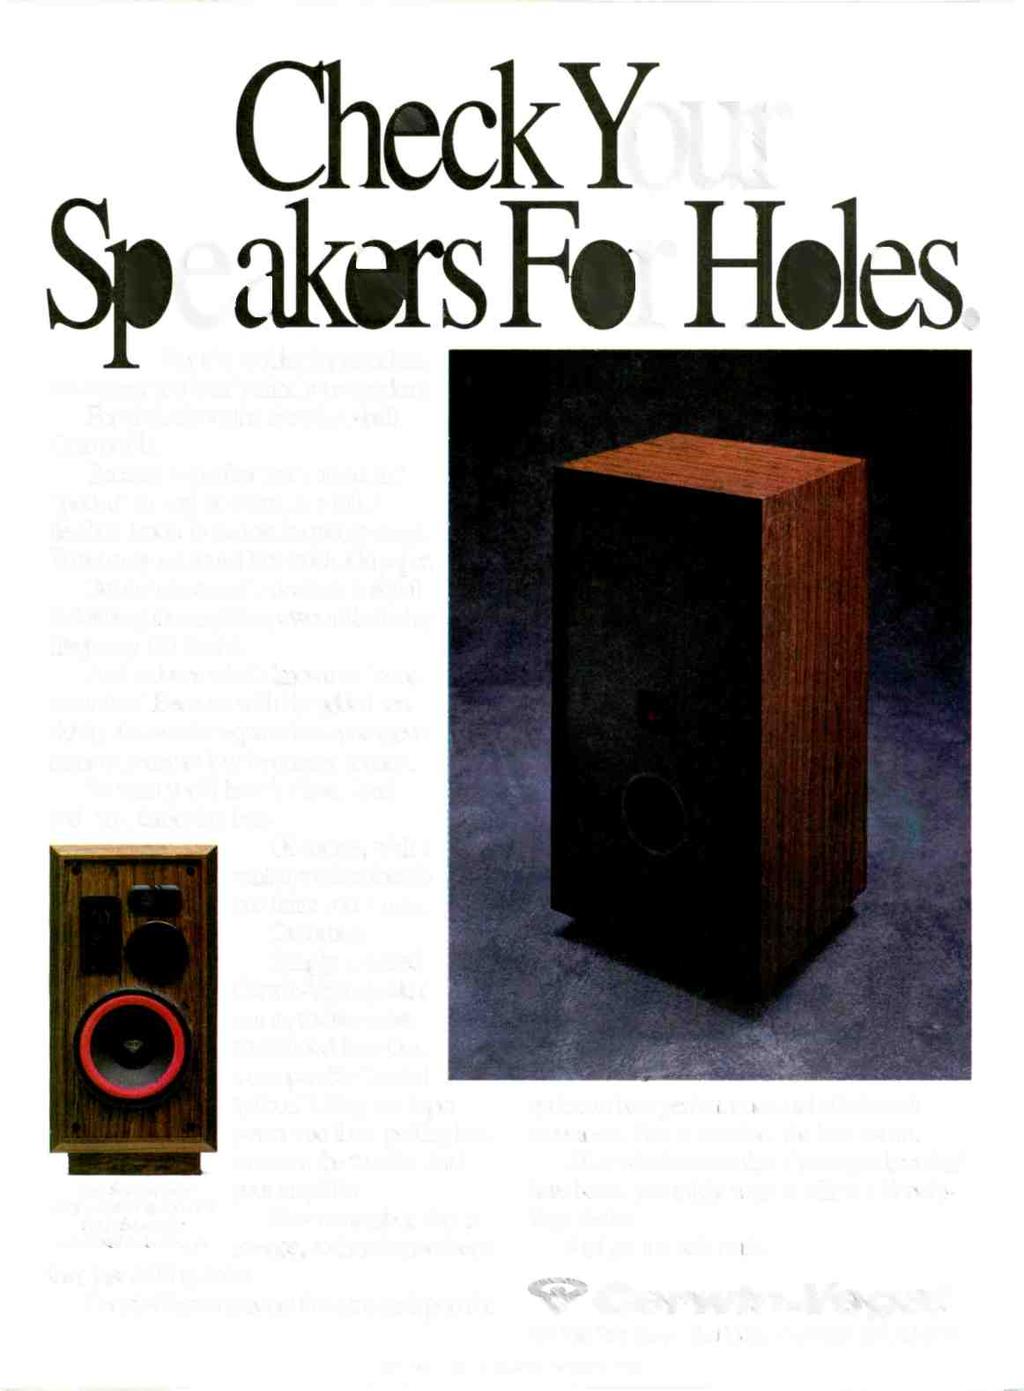 CheckYour S eakers Fiff Holes. If you're looking for great bass, we suggest you look behind your speakers. For a hole about the size of a Q -ball. Or a tortilla.